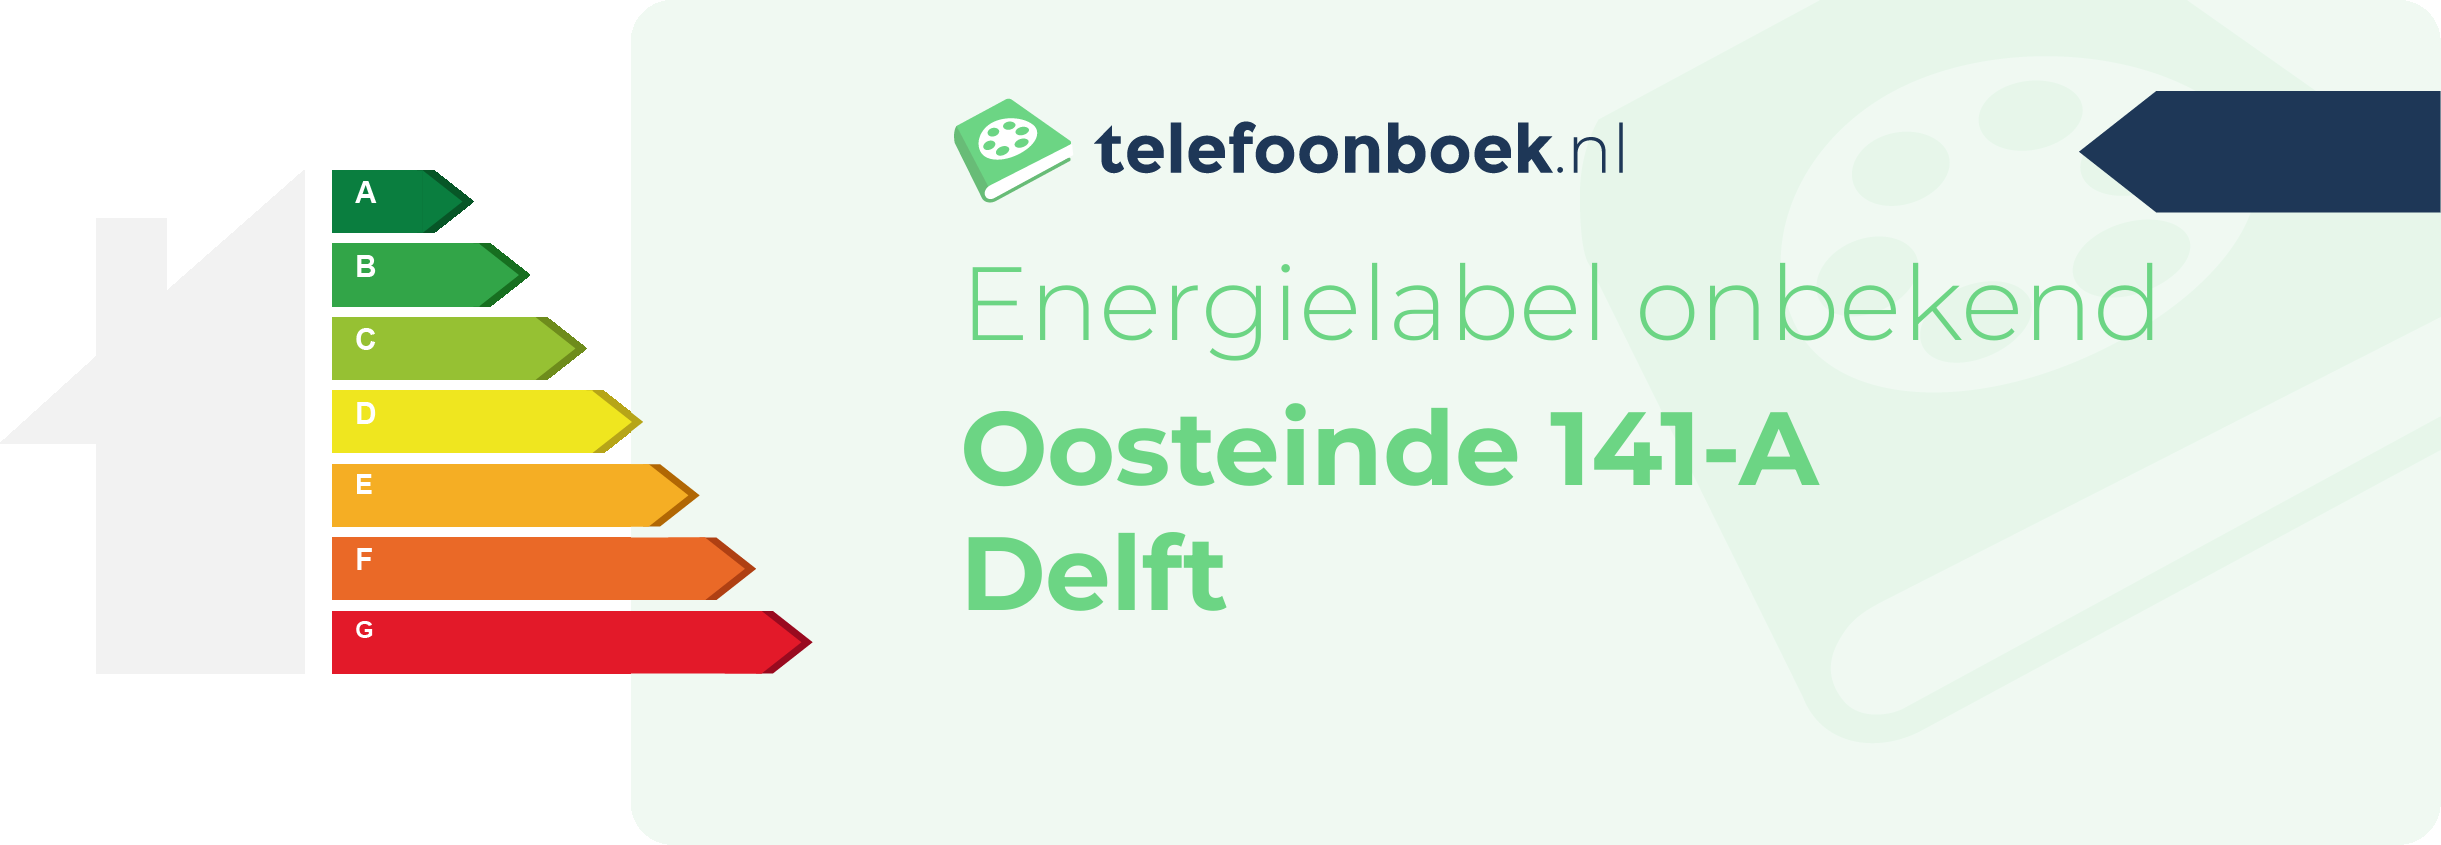 Energielabel Oosteinde 141-A Delft